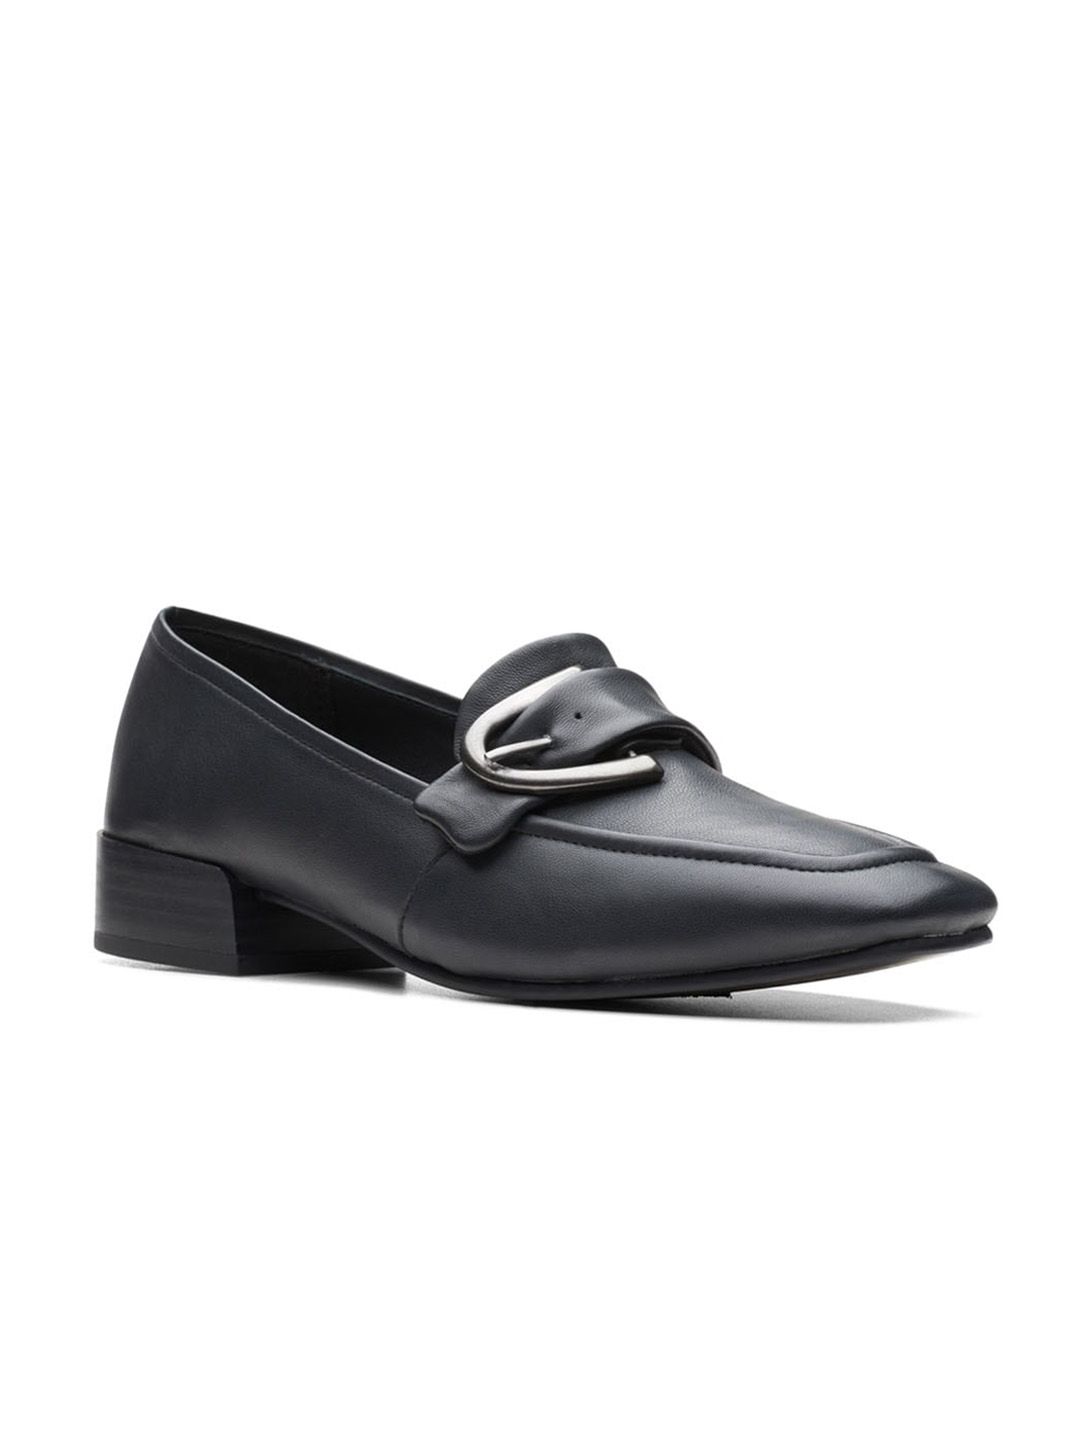 Clarks Women Black Colourblocked Leather Driving Shoes Price in India